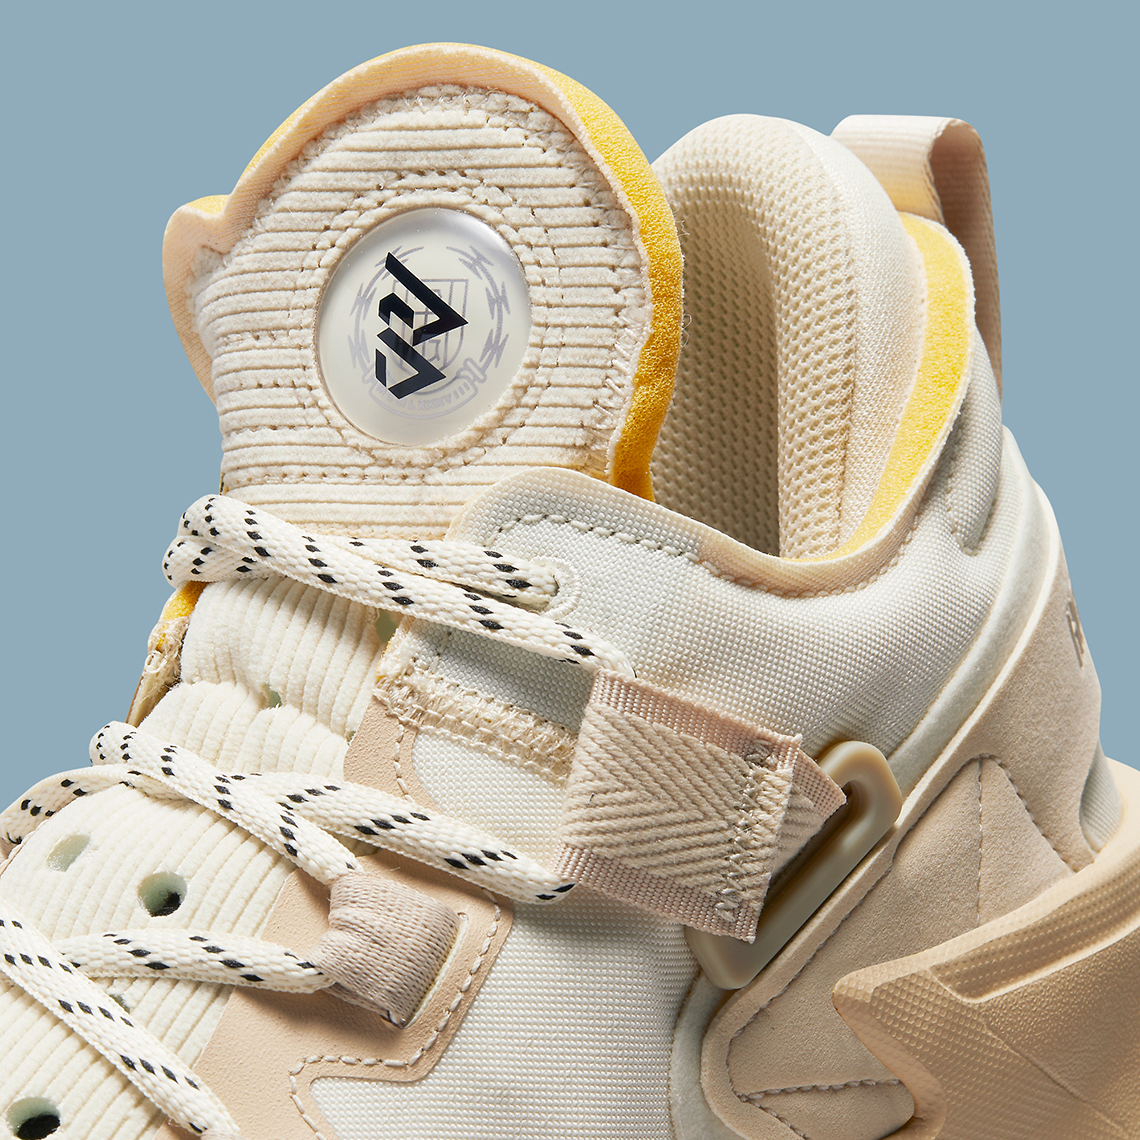 Russell Westbrook's Honor The Gift Channels the Tones of the